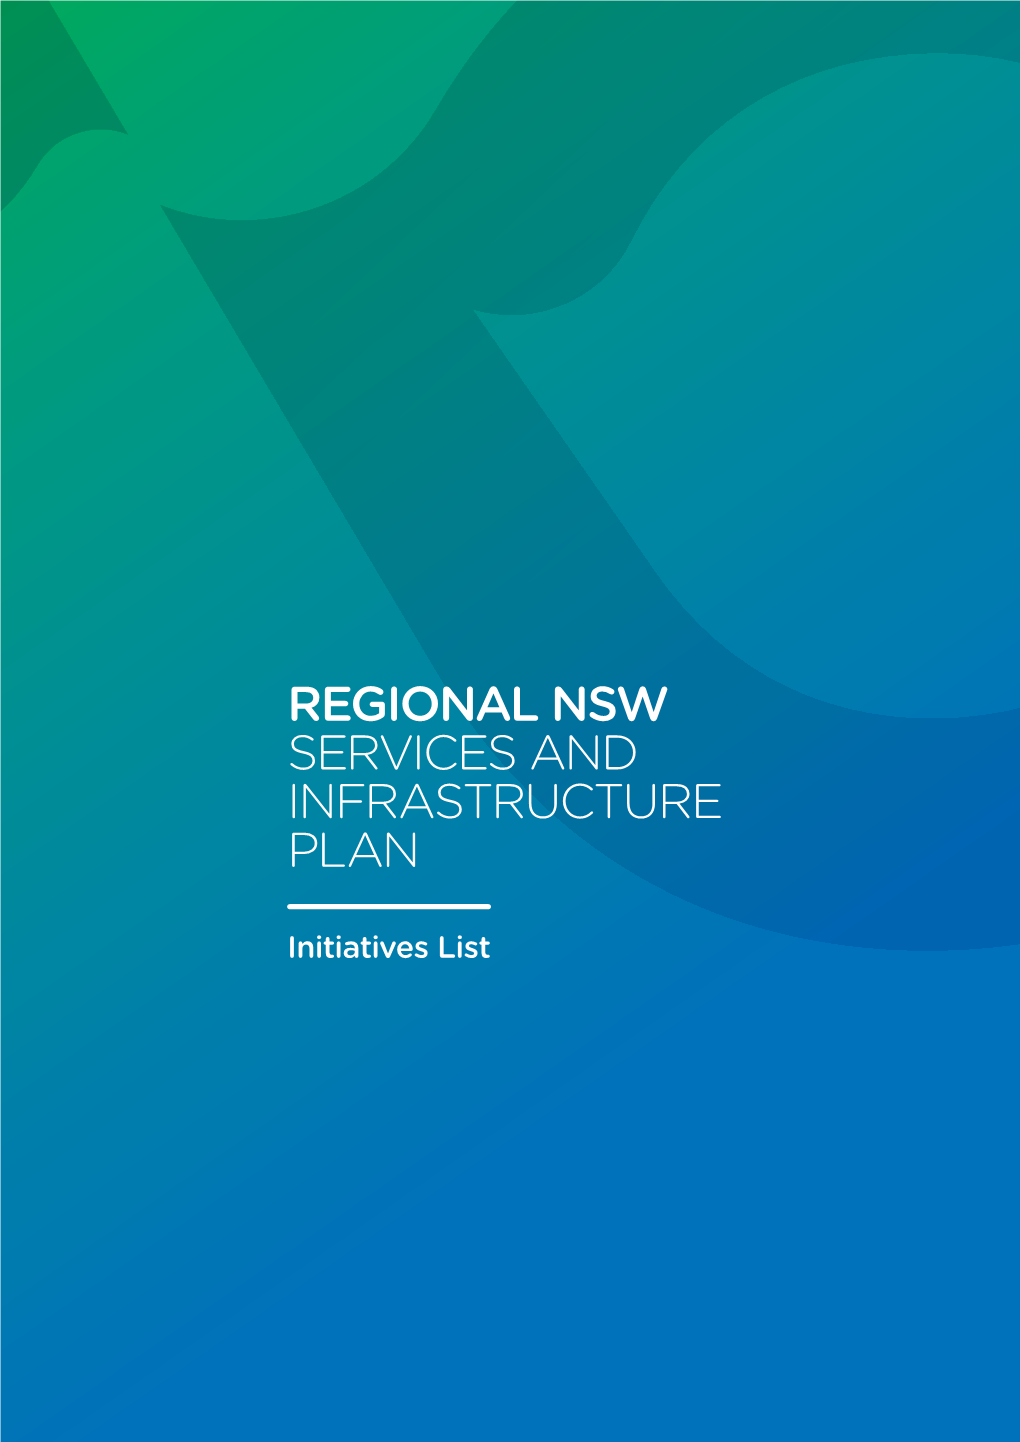 Regional Nsw Services and Infrastructure Plan